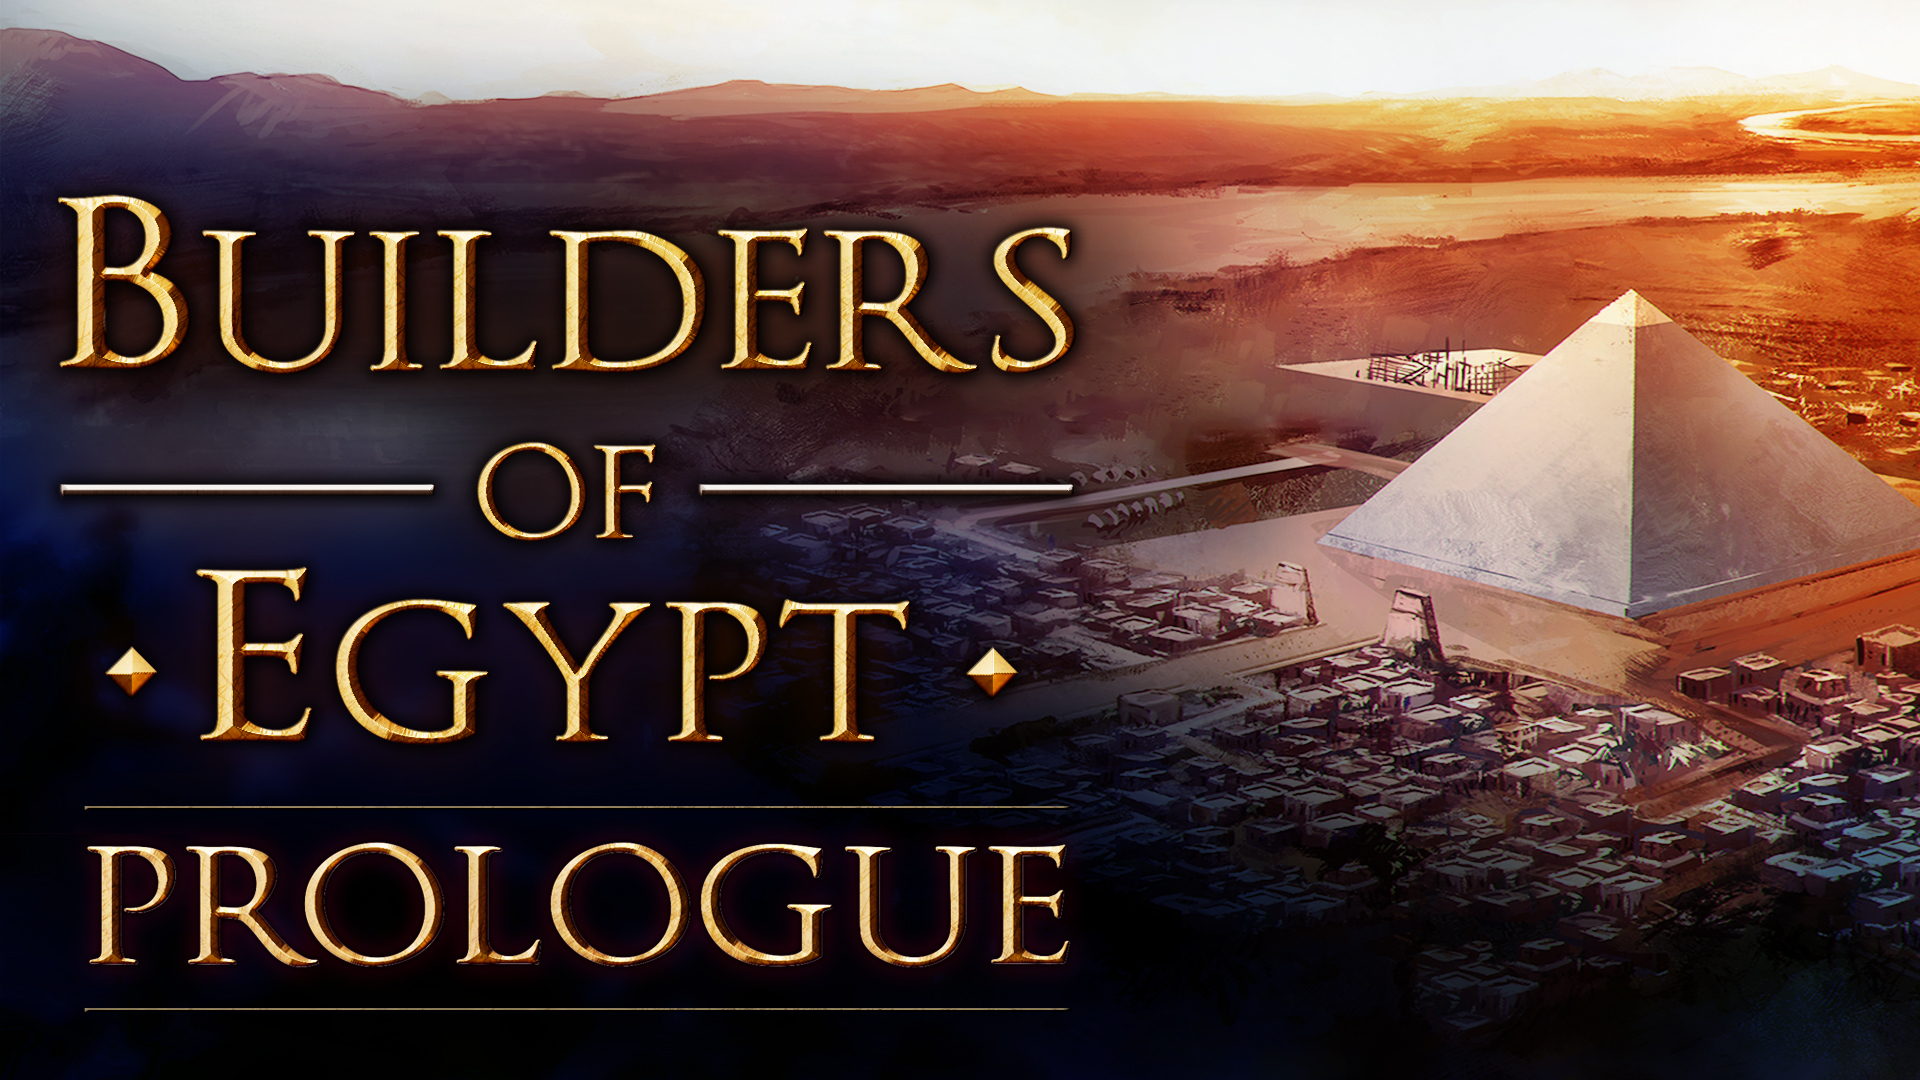 builders of egypt free download